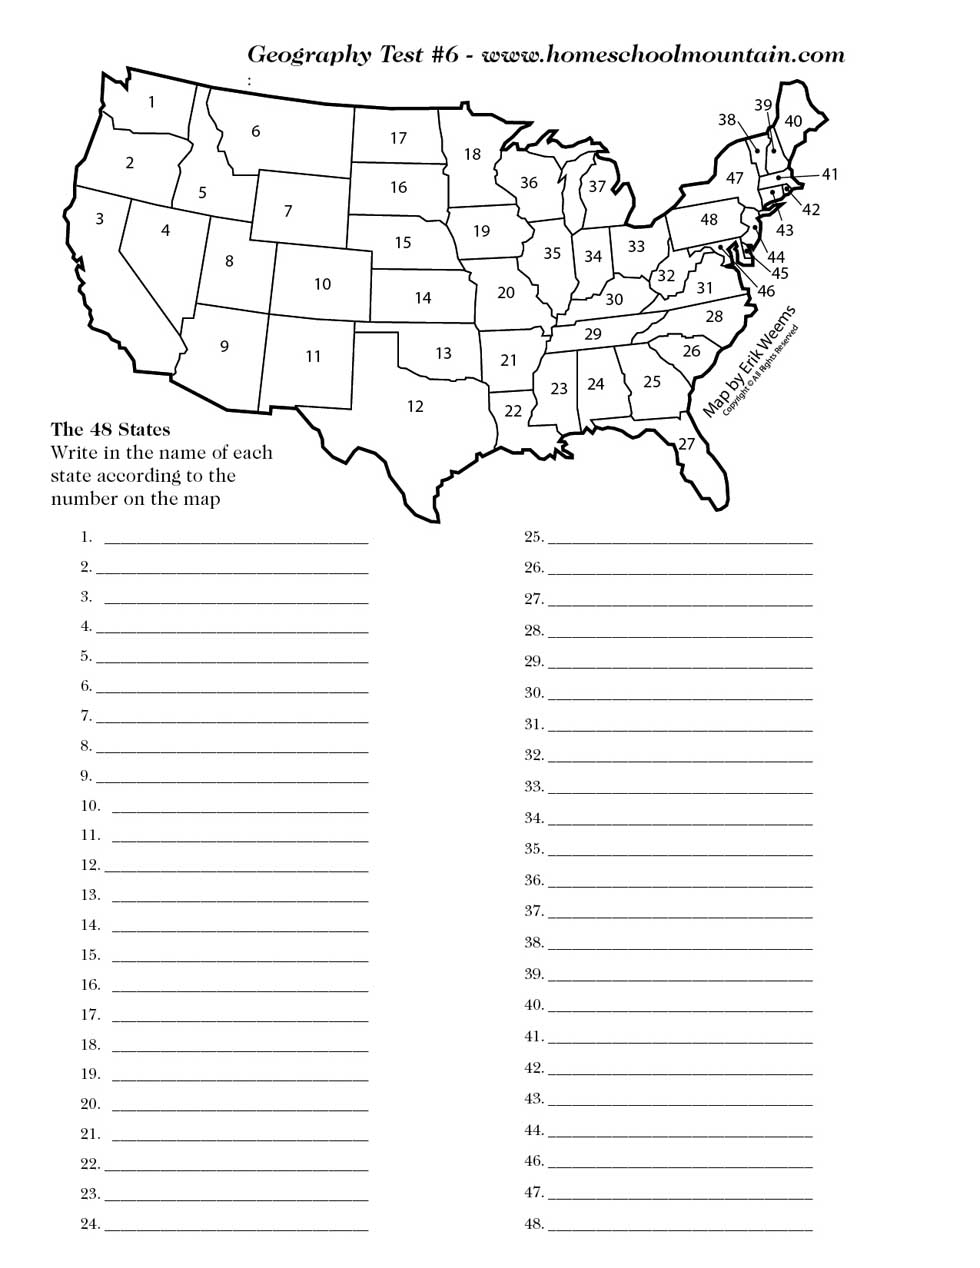 Geography test 6 - 48 States of the United States